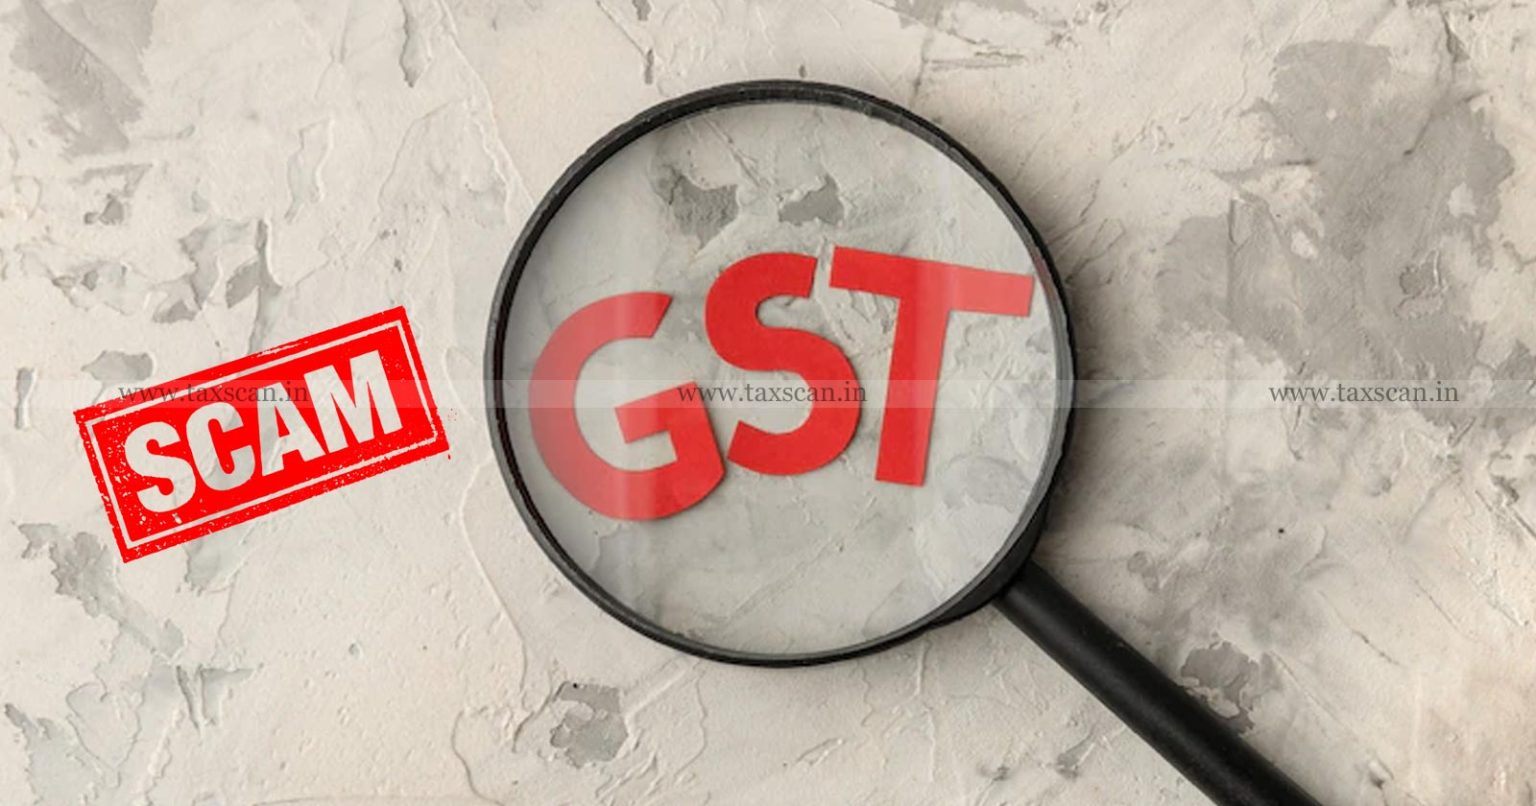 Punjab Vigilance Authorities - arrests Accused - GST Scam - Remanded to Police Custody - taxscan